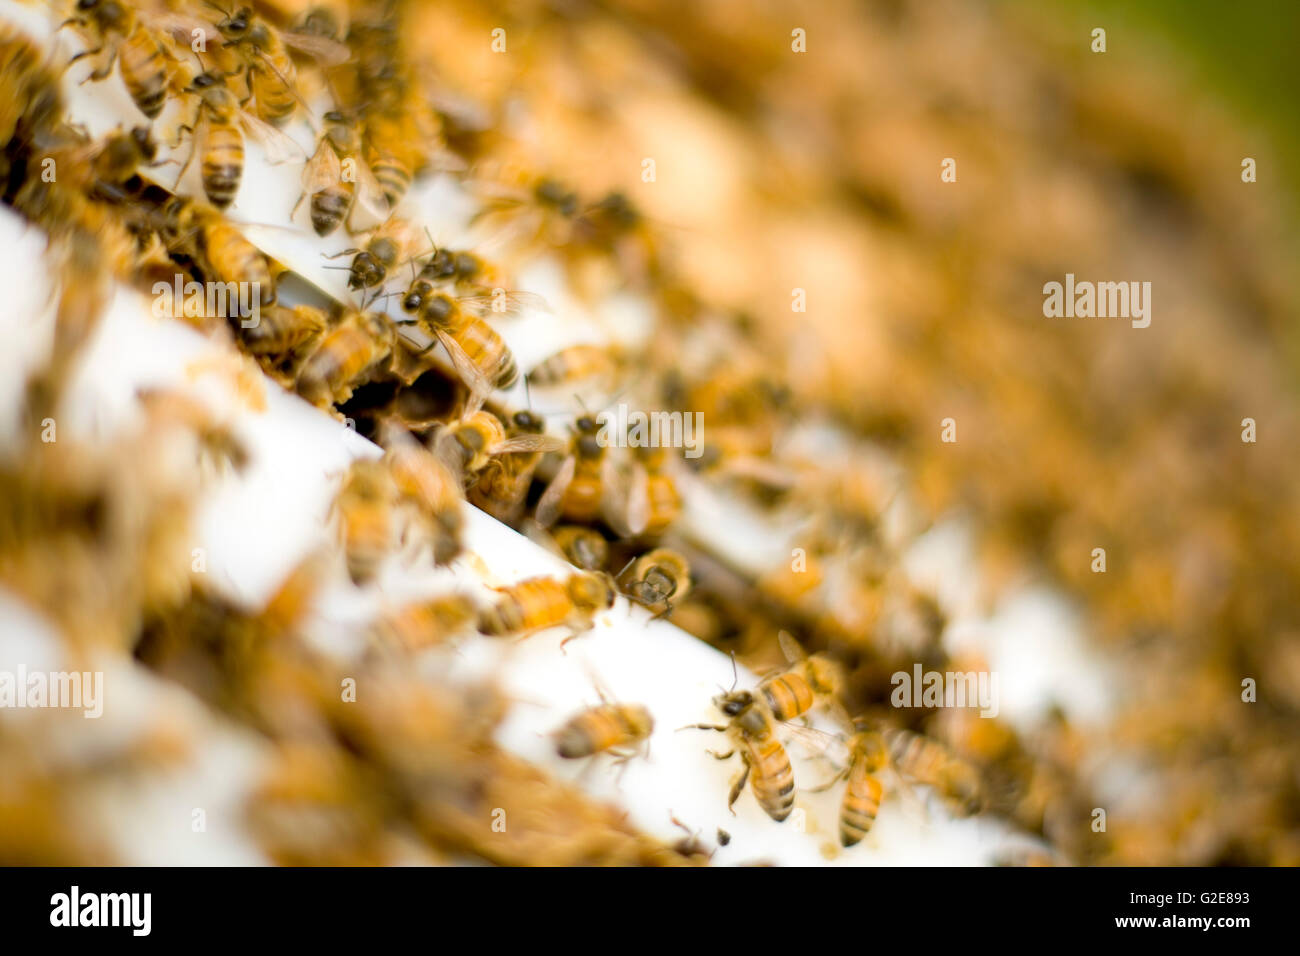 Honey Bees Entering and Exiting Hive Stock Photo